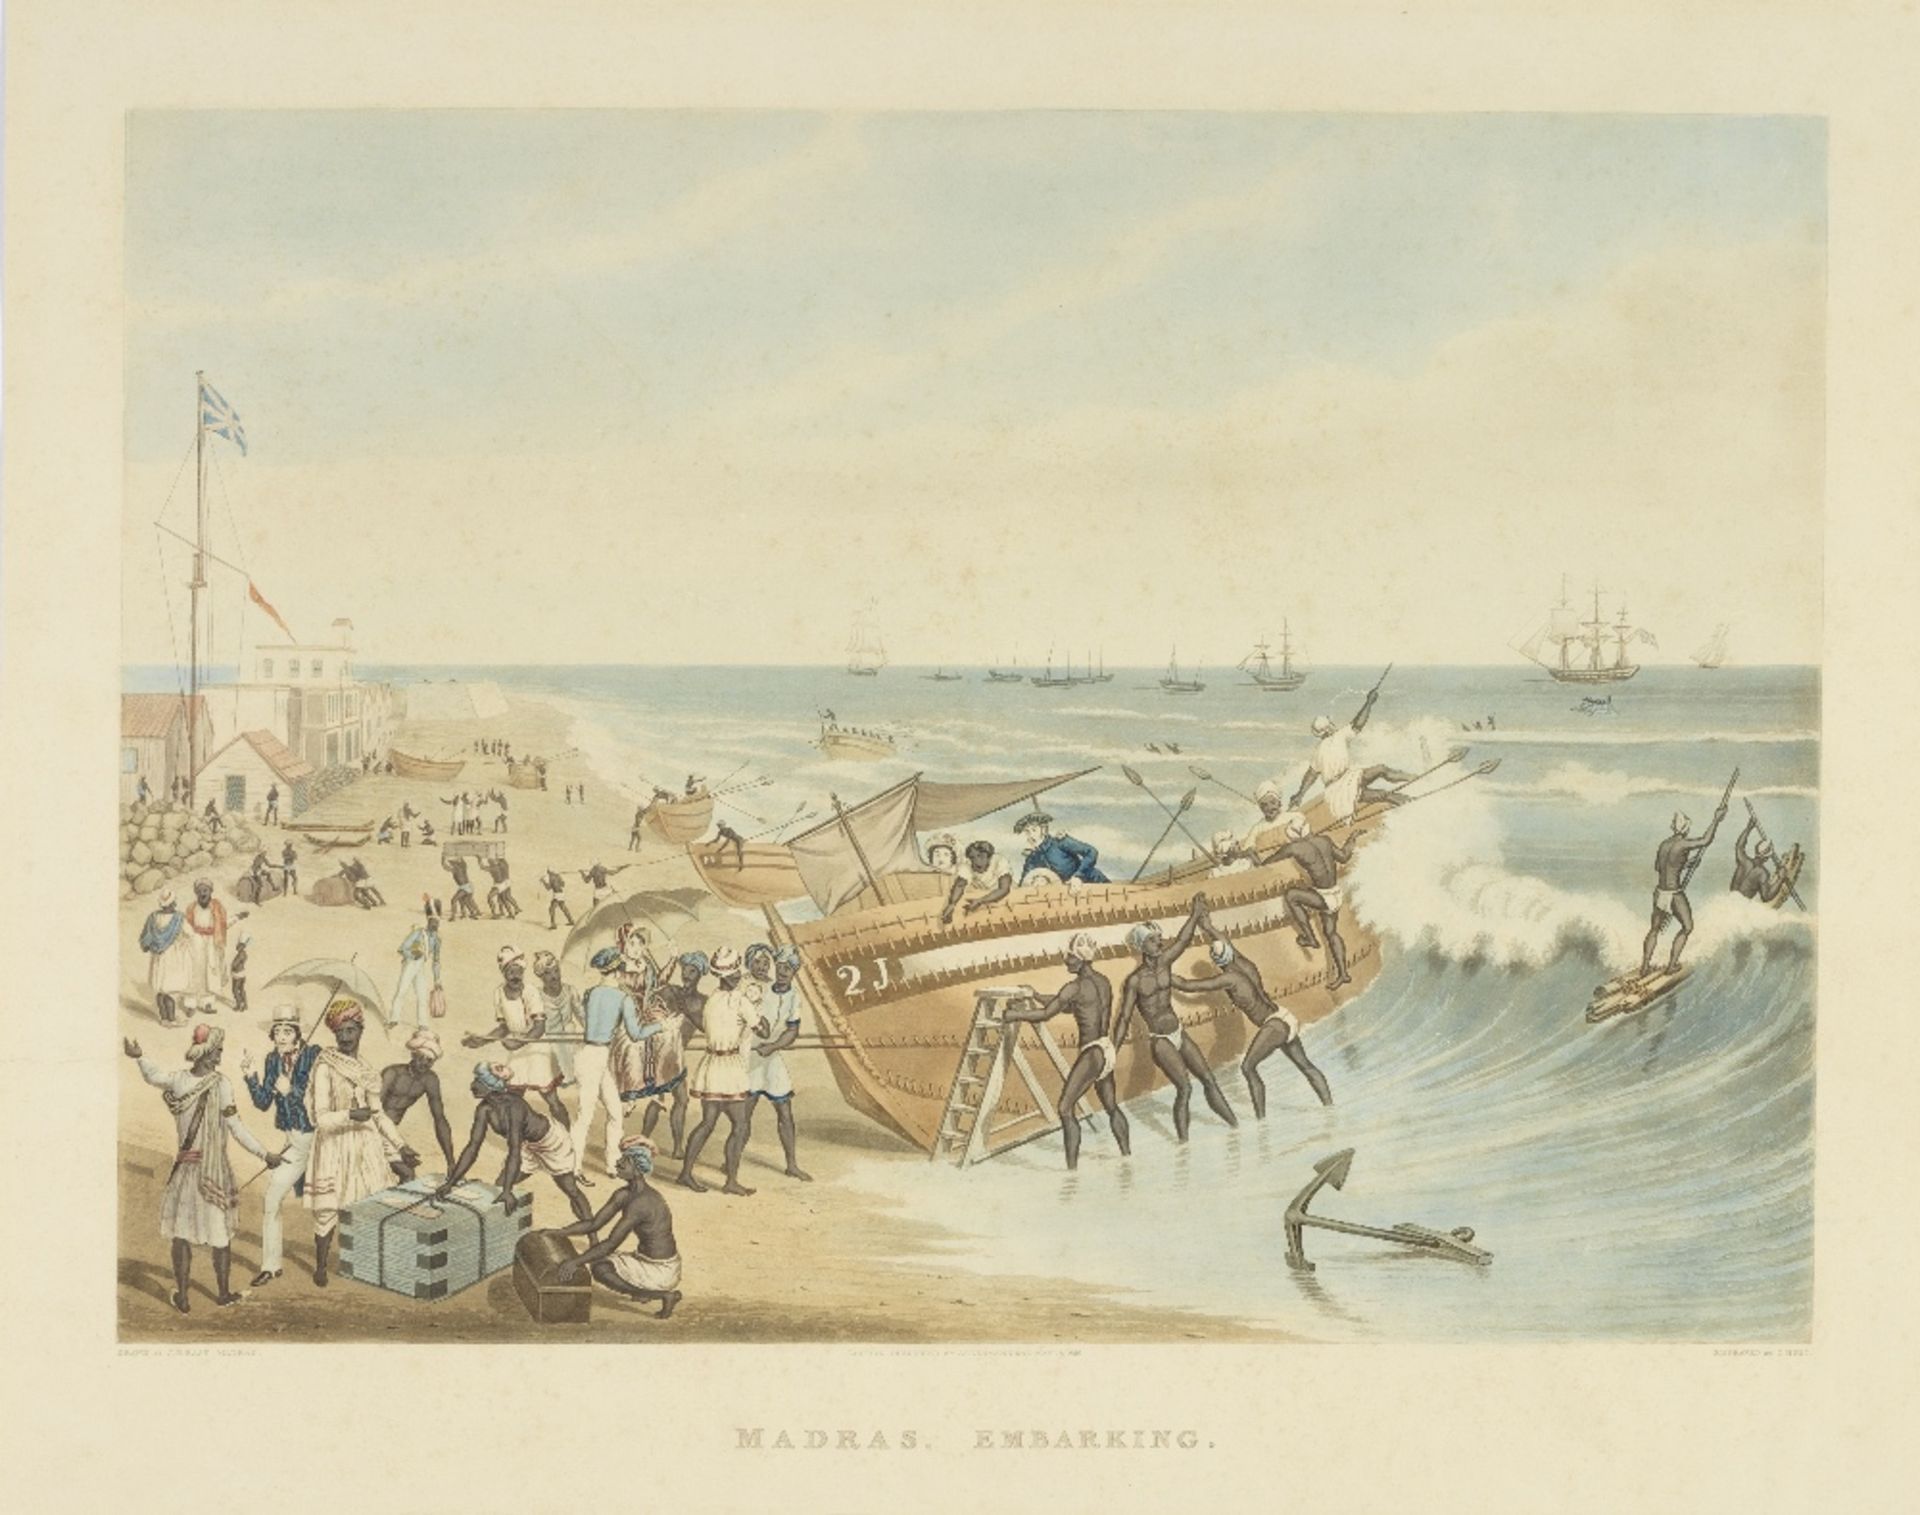 J.B. East (British) 'Madras Embarking' hand-coloured engraved view by C. Hunt after J.B. East, M...